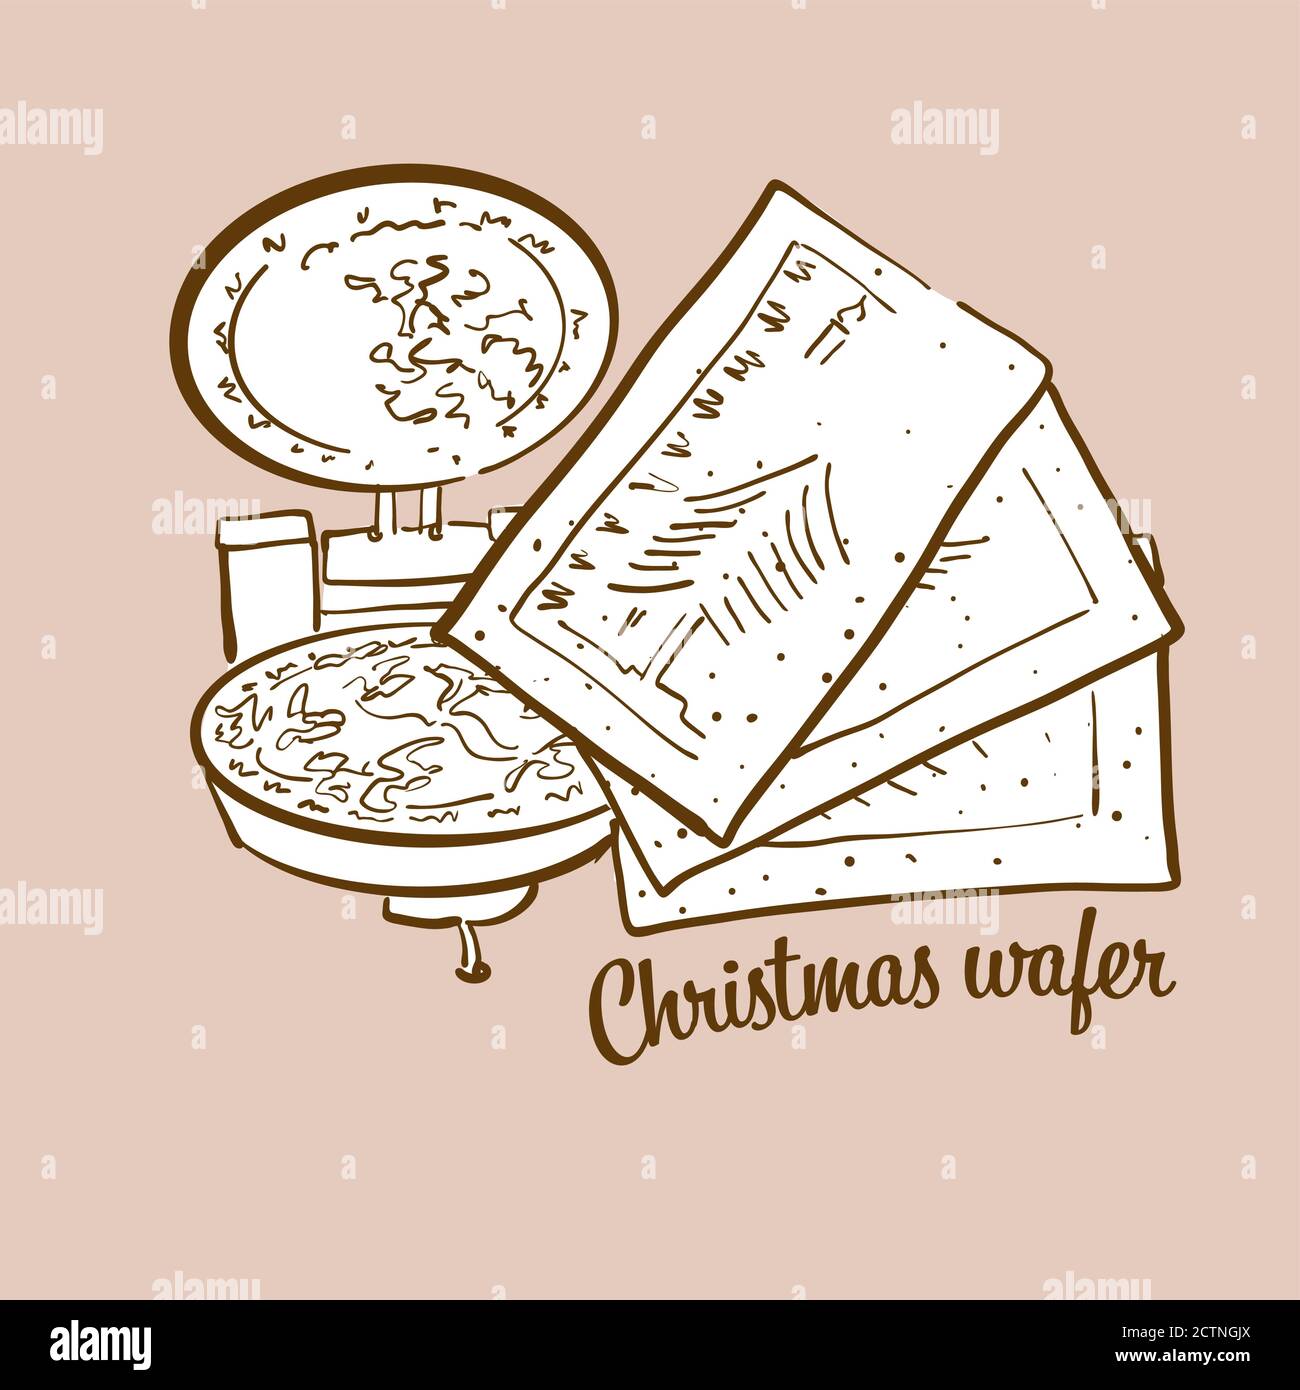 Hand-drawn Christmas wafer bread illustration. Crispy bread, usually known in Eastern Europe. Vector drawing series. Stock Vector